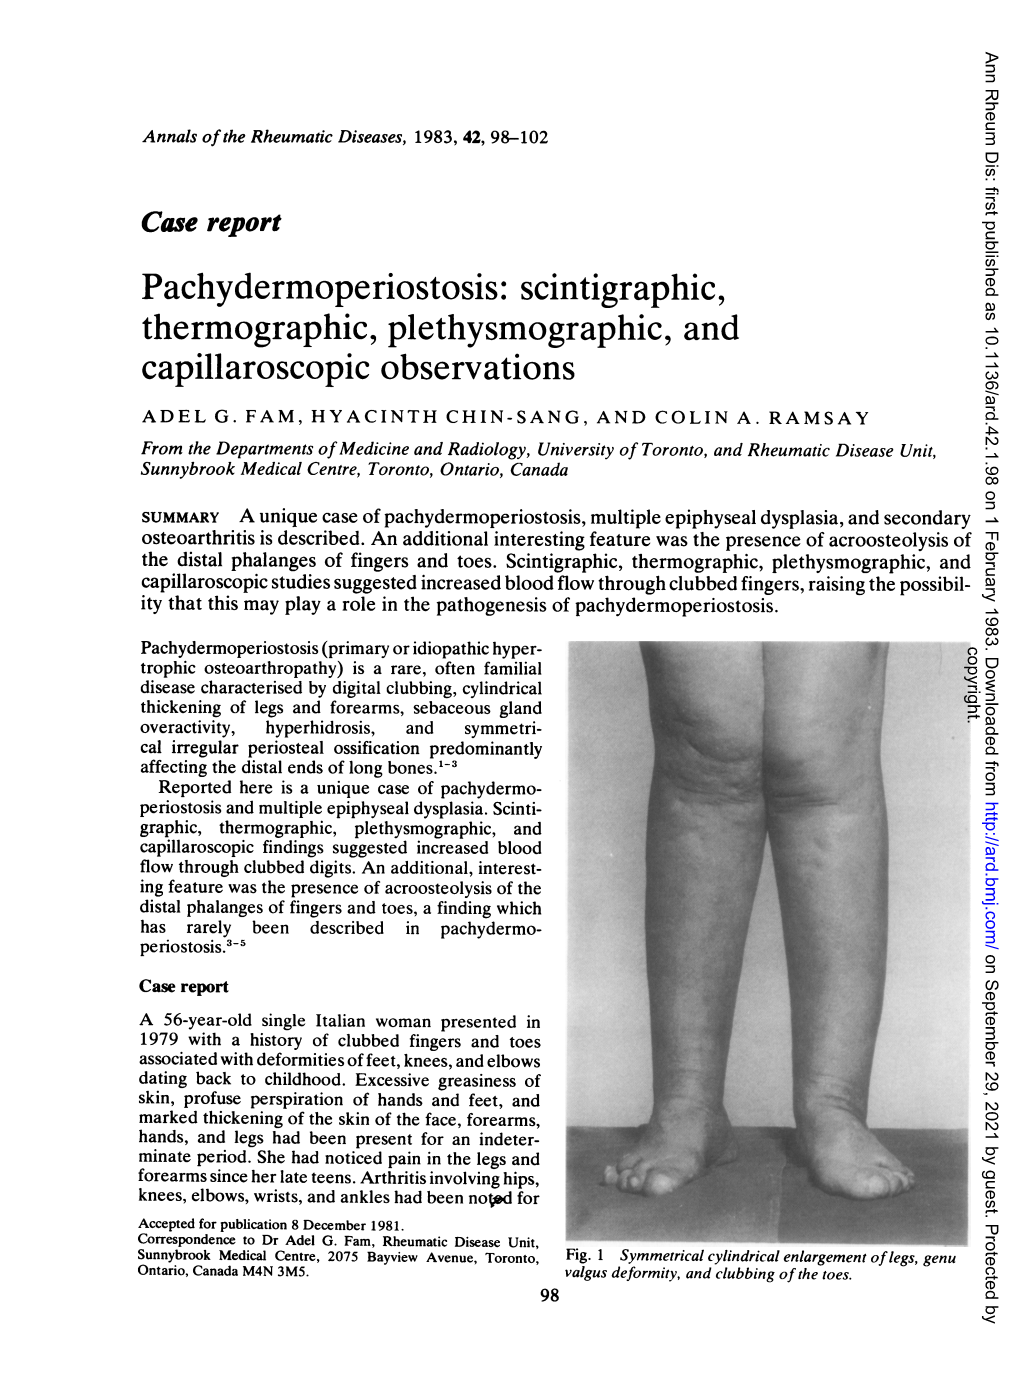 Pachydermoperiostosis: Scintigraphic, Thermographic, Plethysmographic, and Capillaroscopic Observations ADEL G